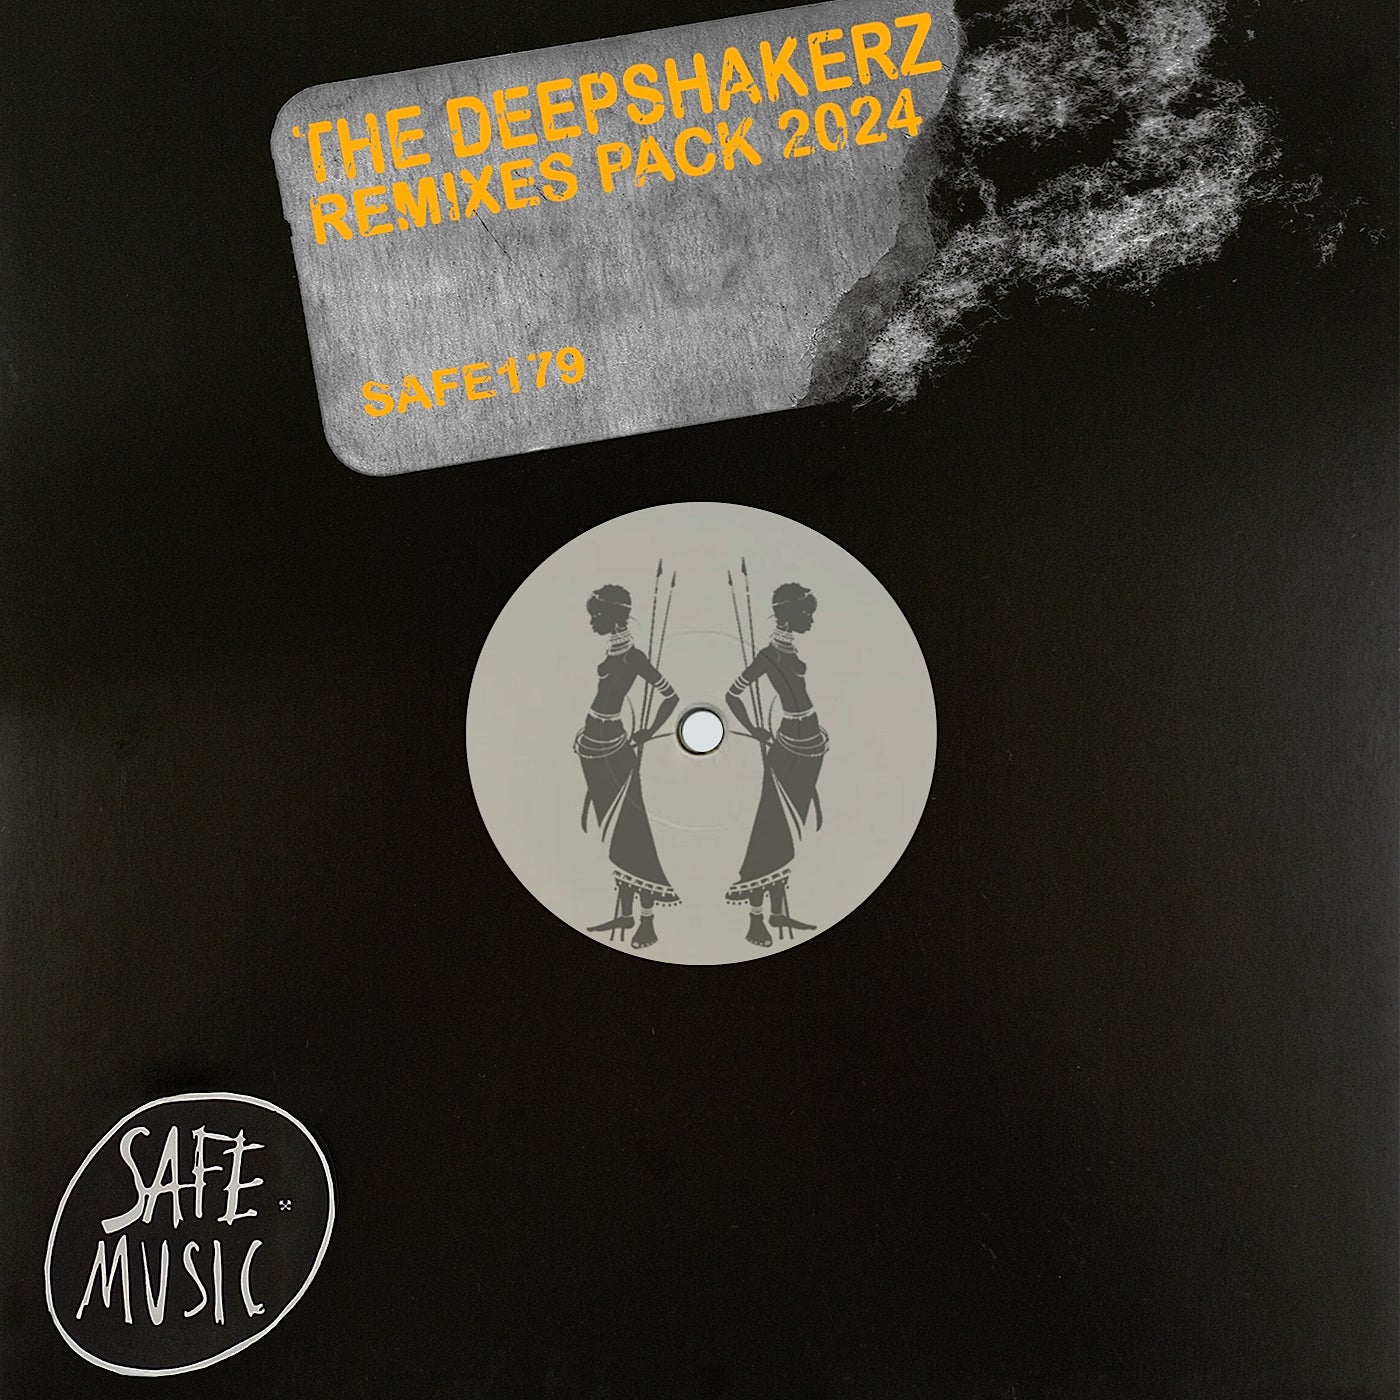 image cover: The Deepshakerz & Black Savana - Remixes Pack 2024 (incl. Fex and Jaykill remixes) on Safe Music